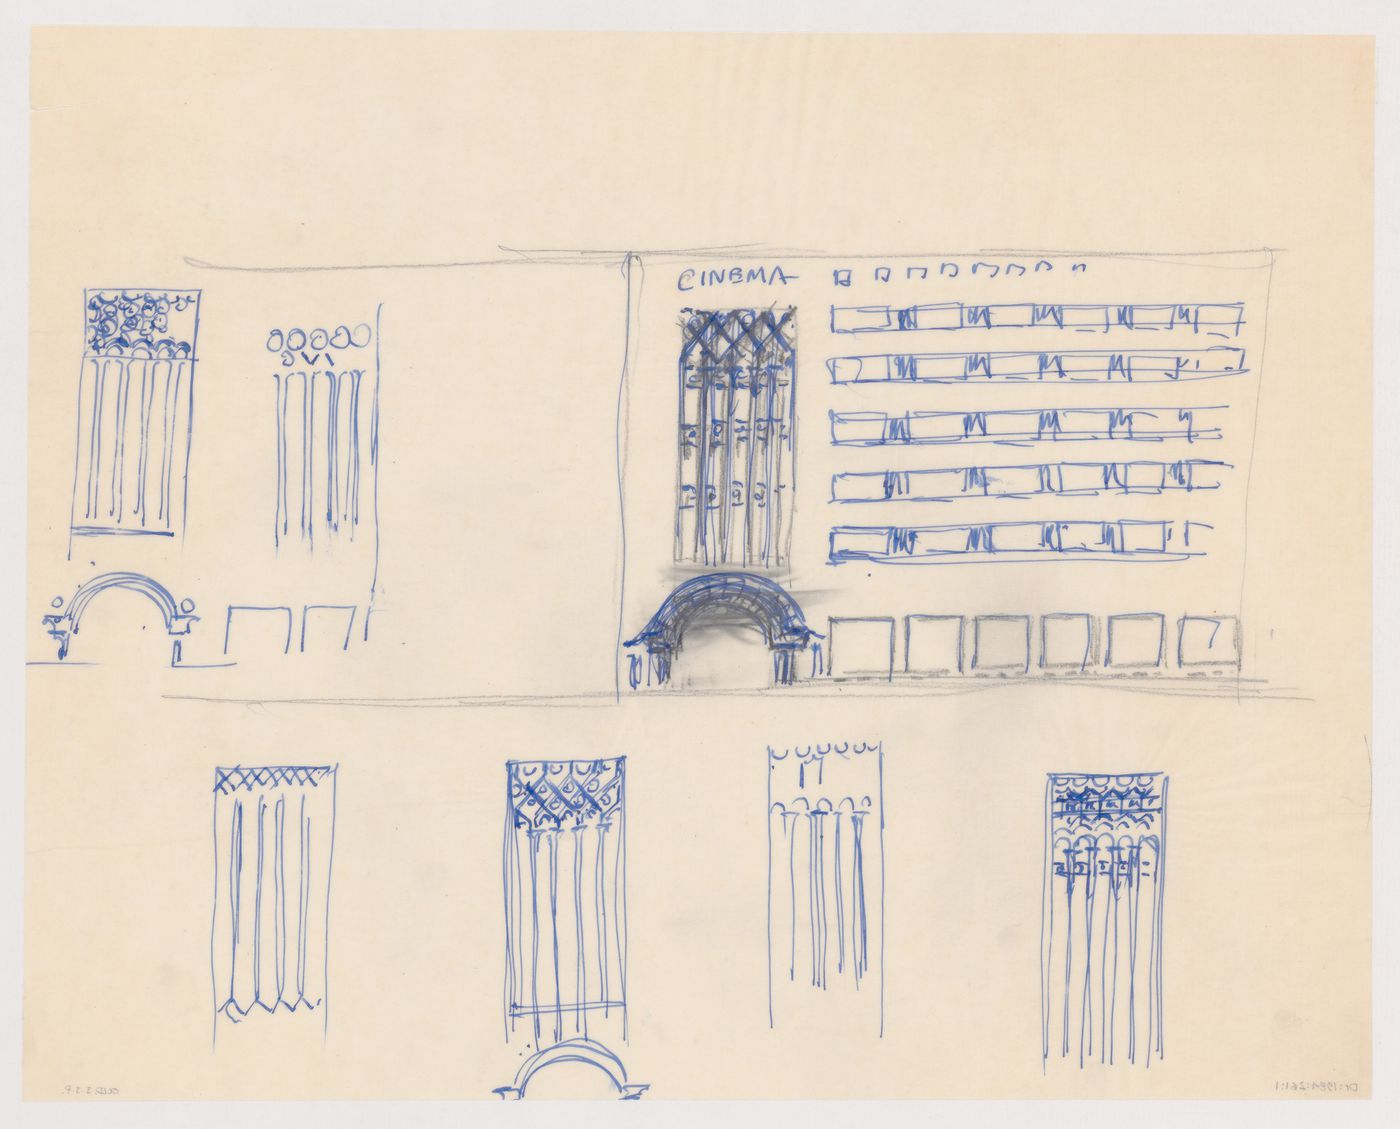 Sketch elevation and details for exterior ornament for a model for a cinema for the reconstruction of the Hofplein (city centre), Rotterdam, Netherlands